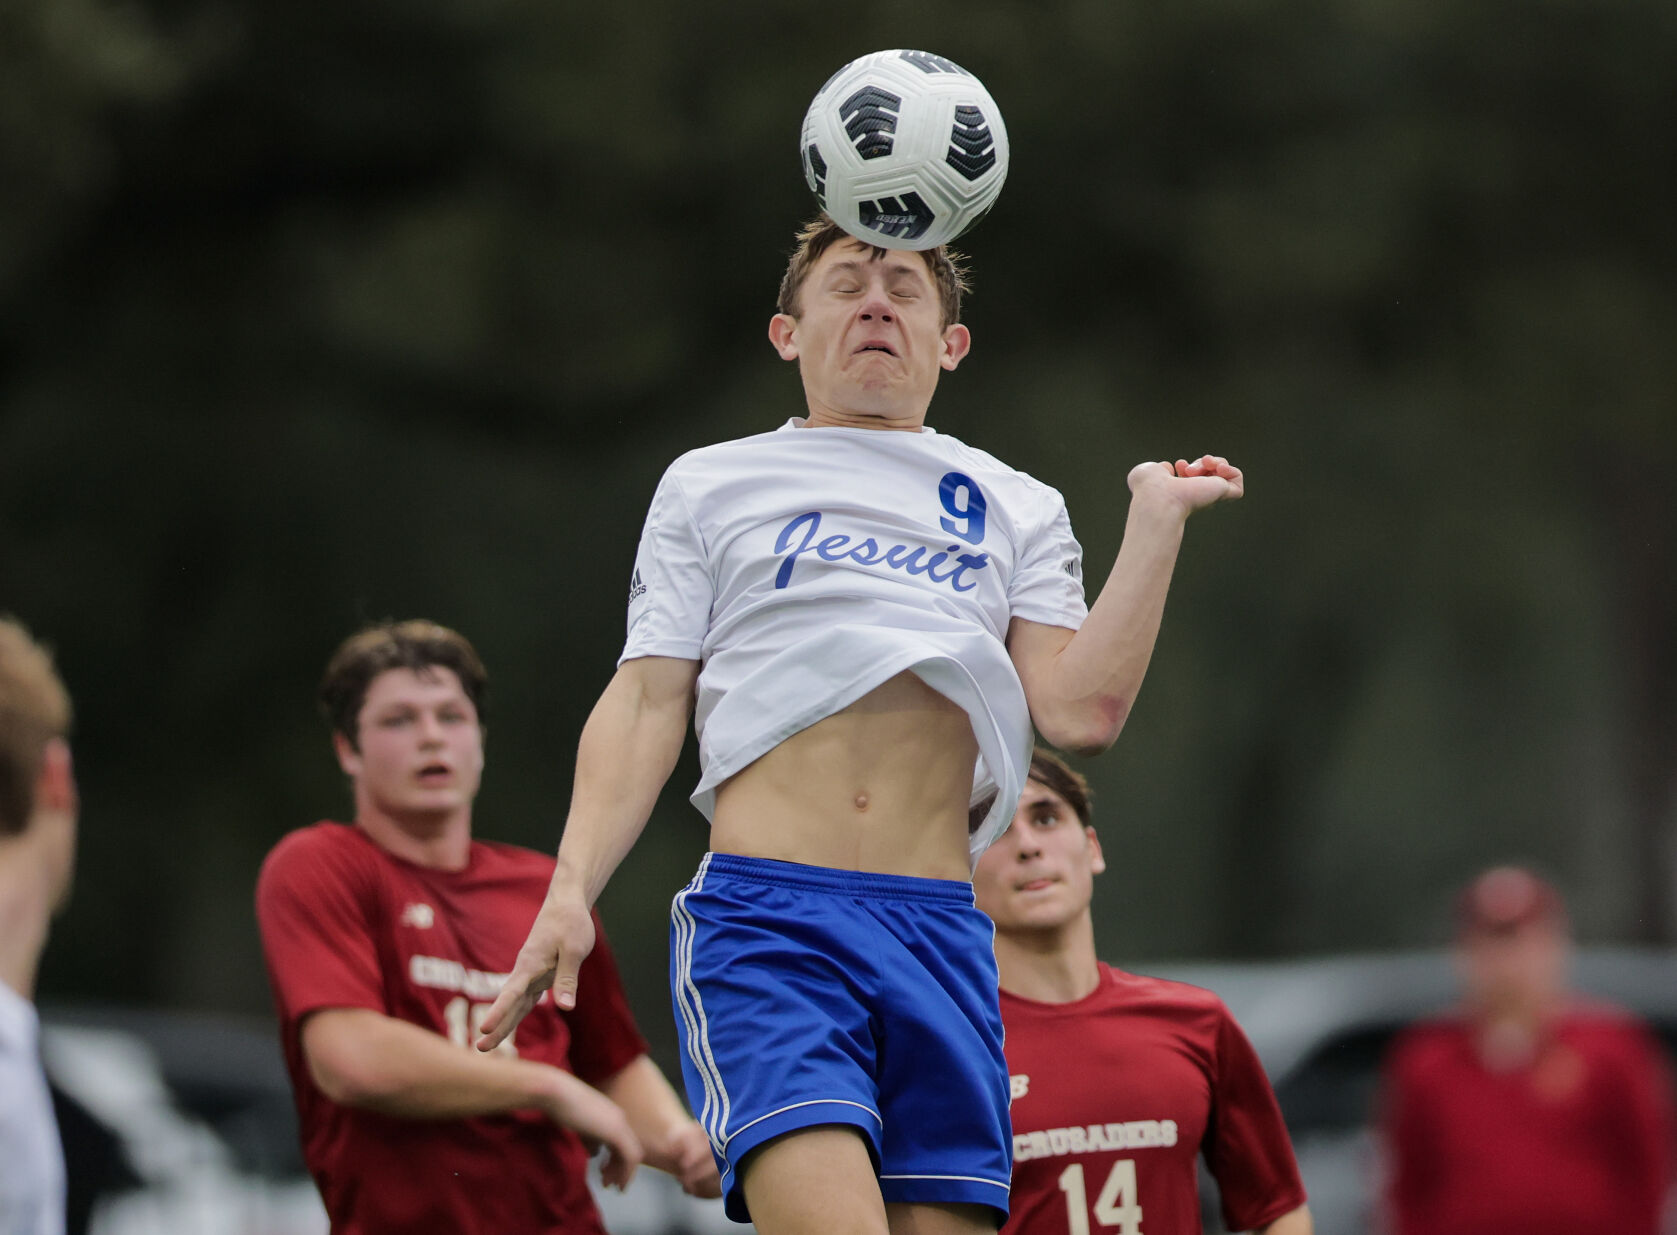 Jesuit Secures Victory Over Brother Martin in Playoff Match